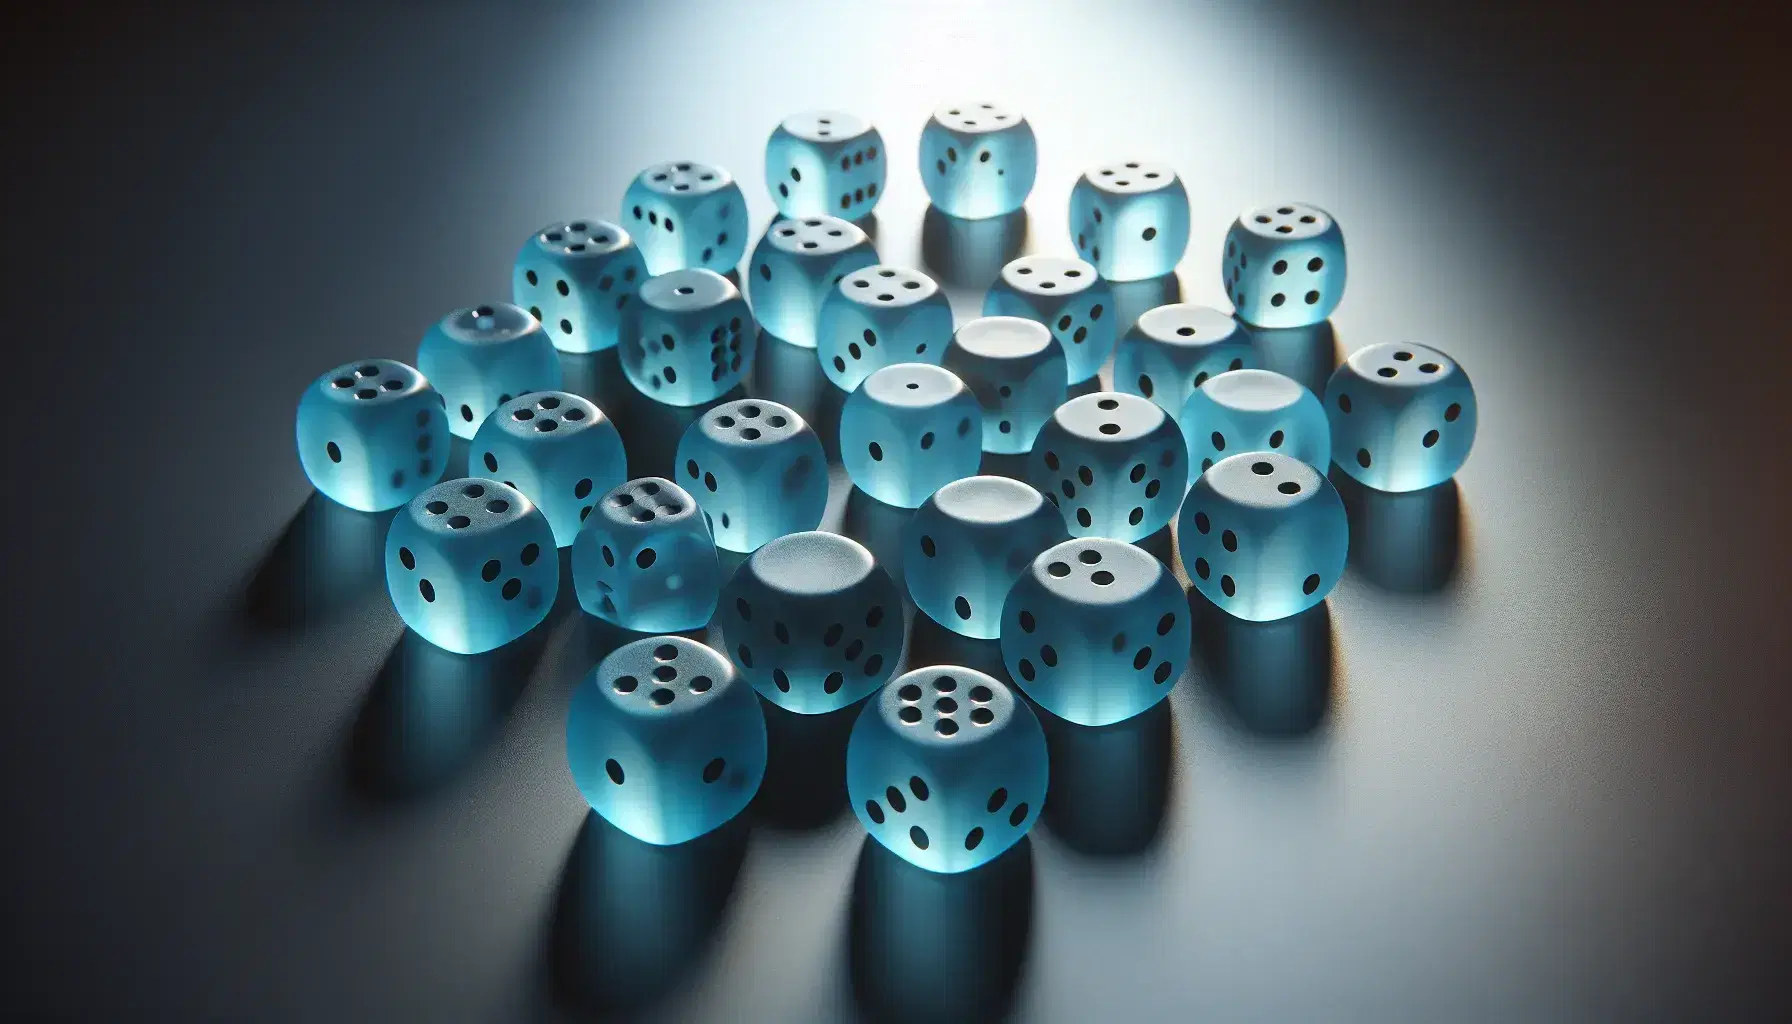 Translucent blue dice spread across a matte black surface, with numbers from one to six visible and light shadows creating a floating effect.